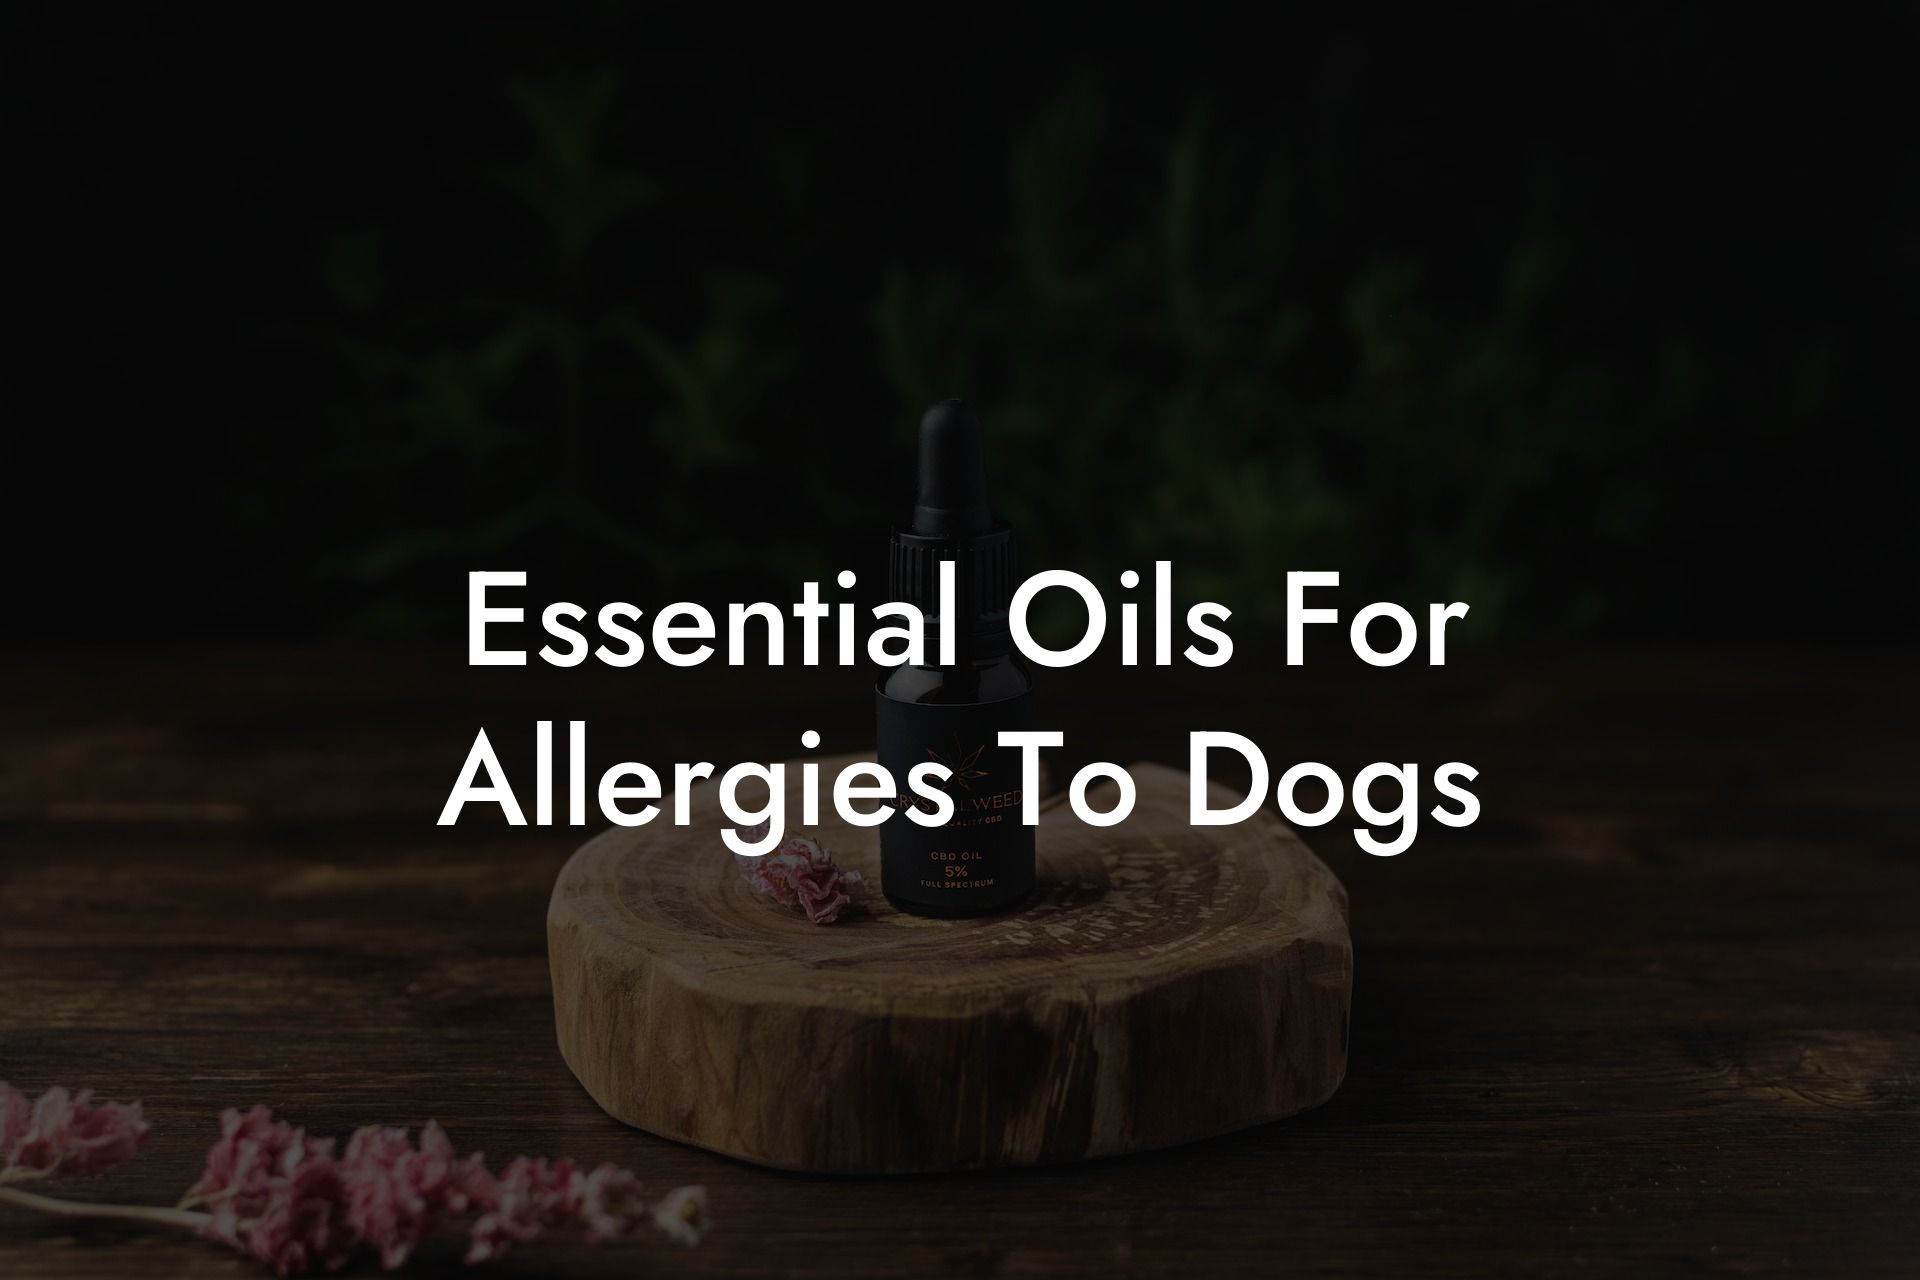 Essential Oils For Allergies To Dogs